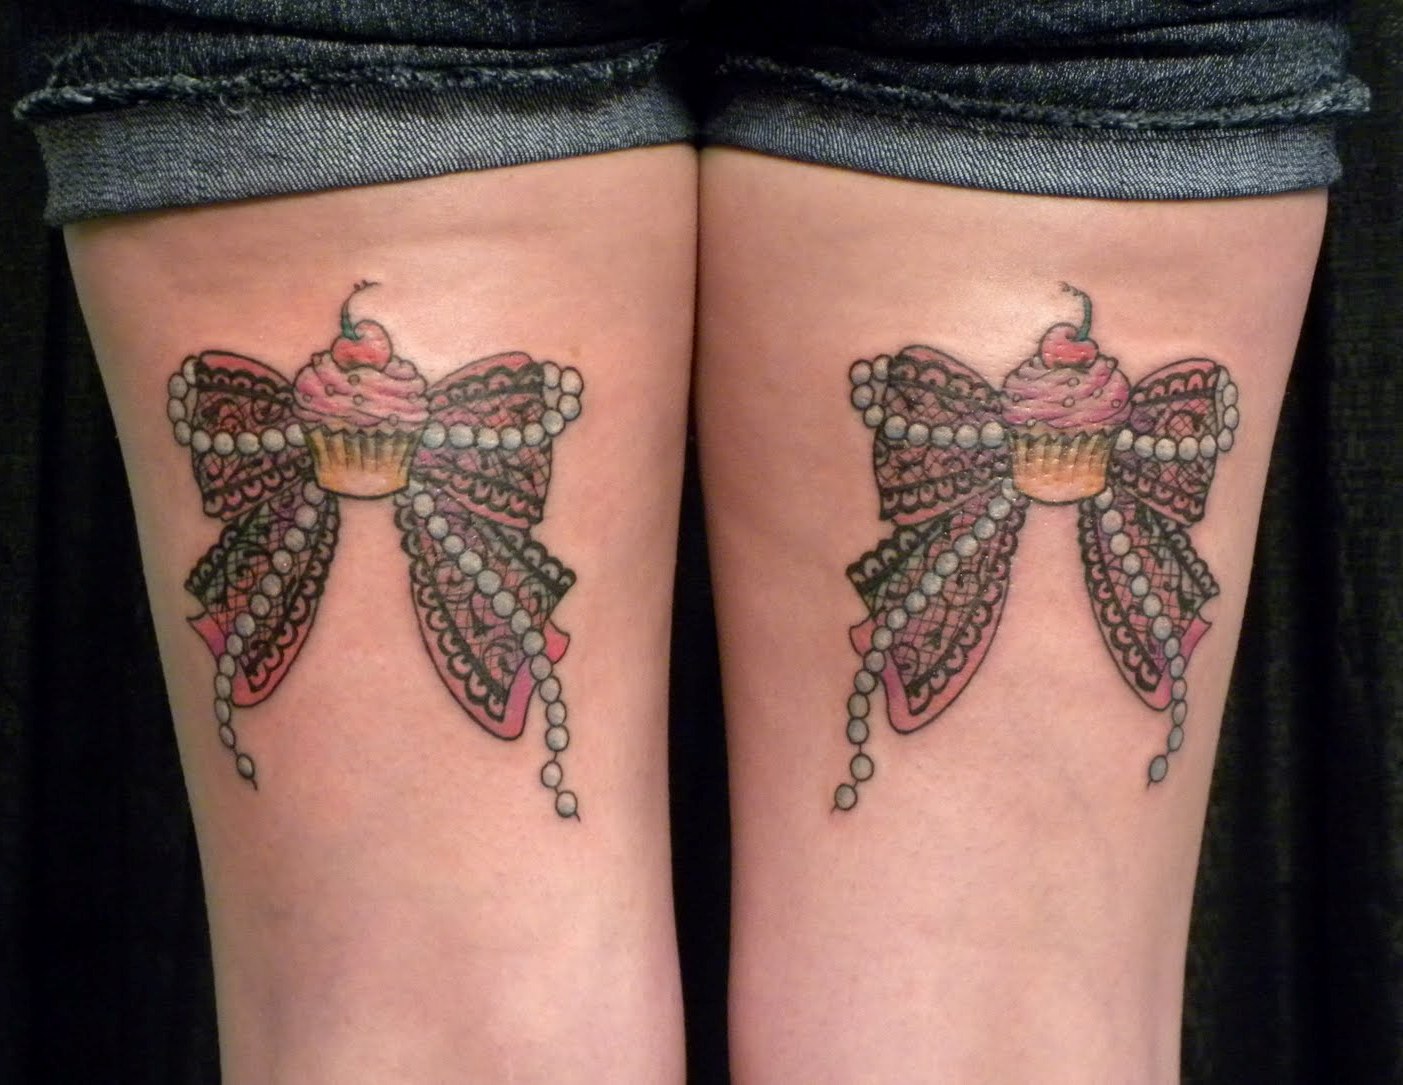 2. 10 stunning bow tattoo designs for the back of your thighs - wide 5